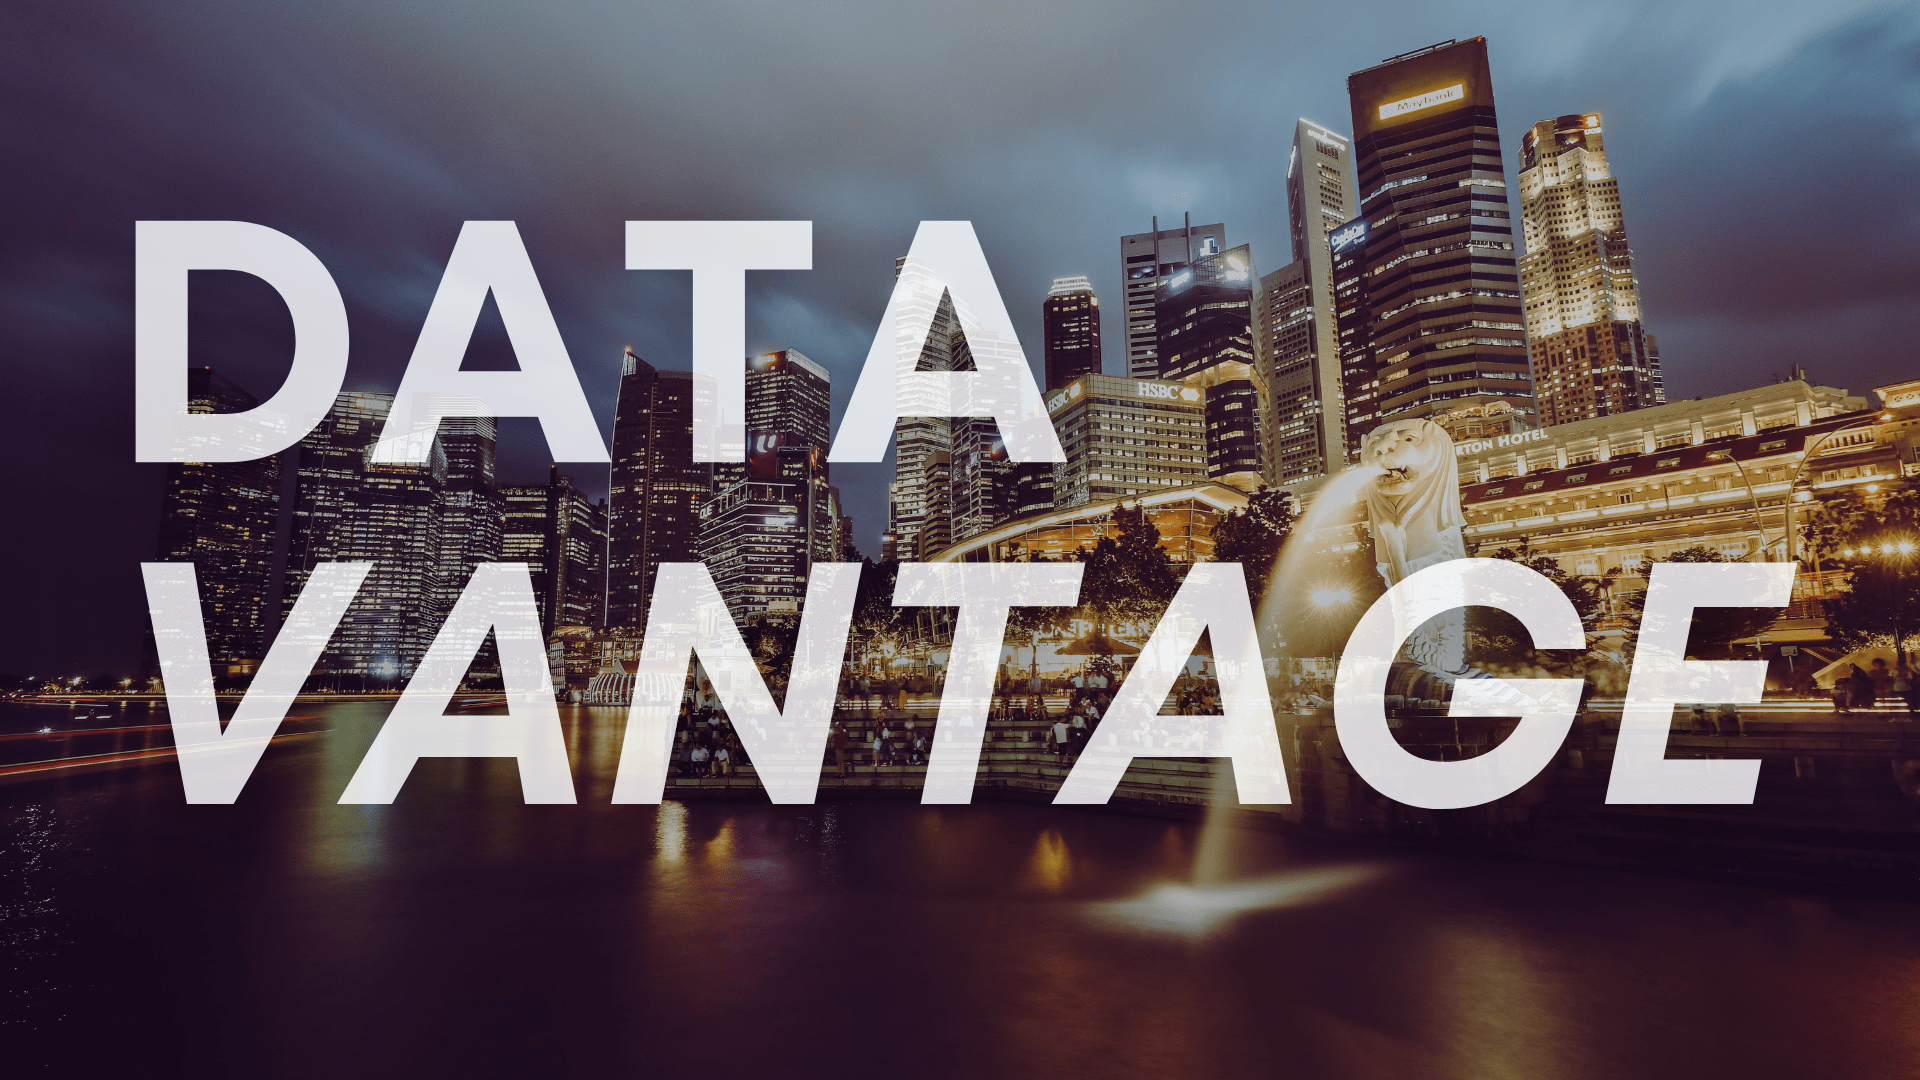 Data Vantage: Rent 2 Own, Flash Coffee, Blue Planet, Sky Mavis and Pomelo in focus